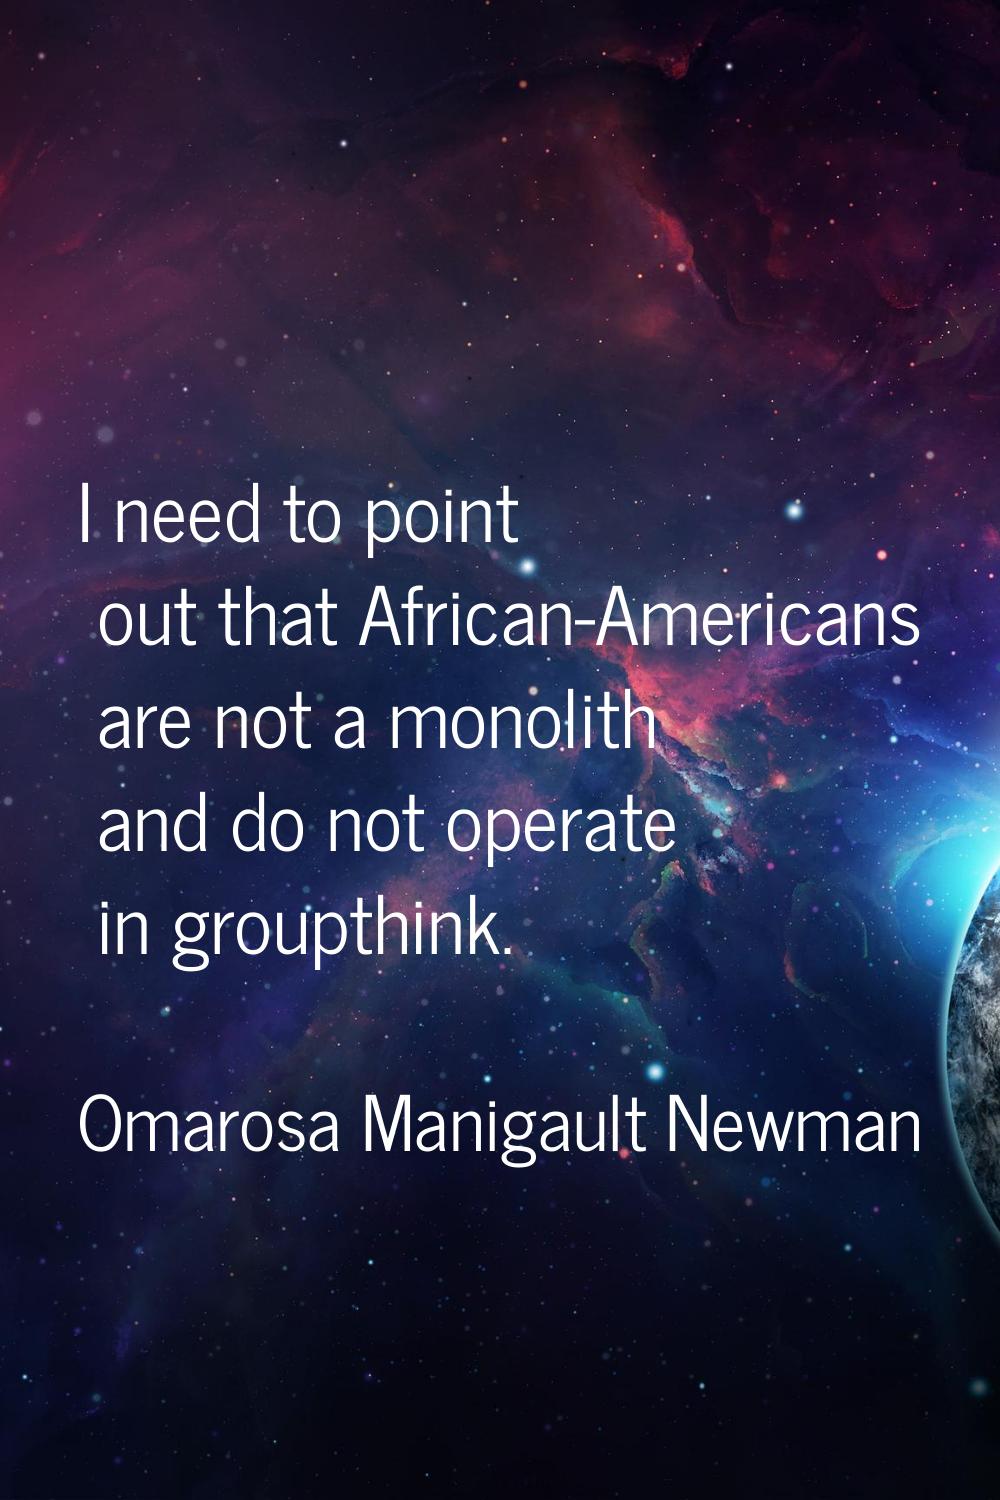 I need to point out that African-Americans are not a monolith and do not operate in groupthink.